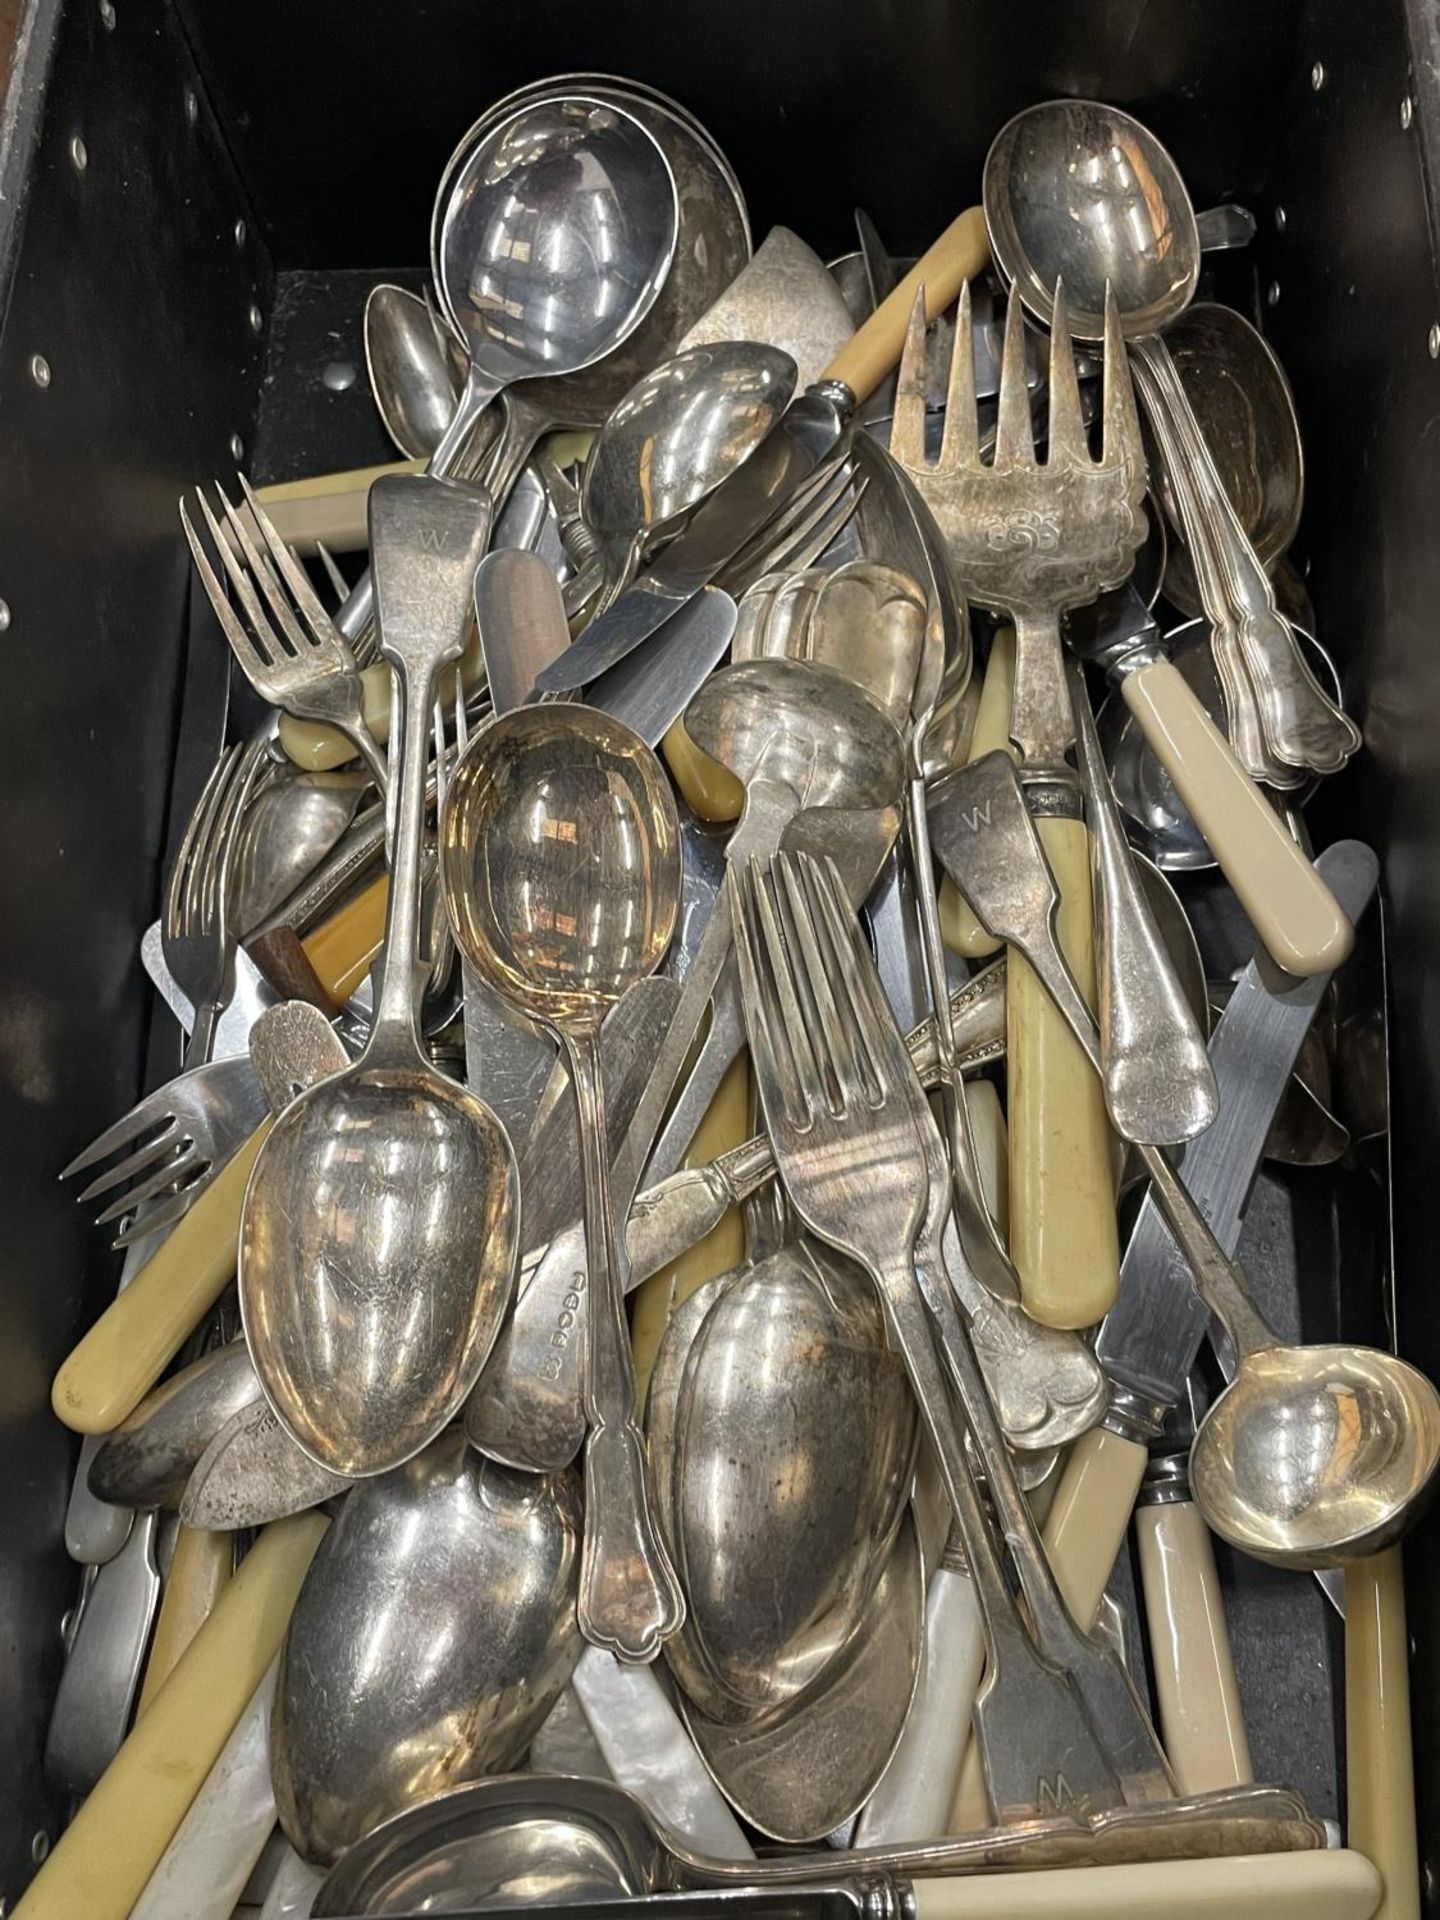 A LARGE QUANTITY OF VINTAGE FLATWARE TO INCLUDE KNIVES, FORKS, SPOONS, LADELS, ETC - Image 3 of 3